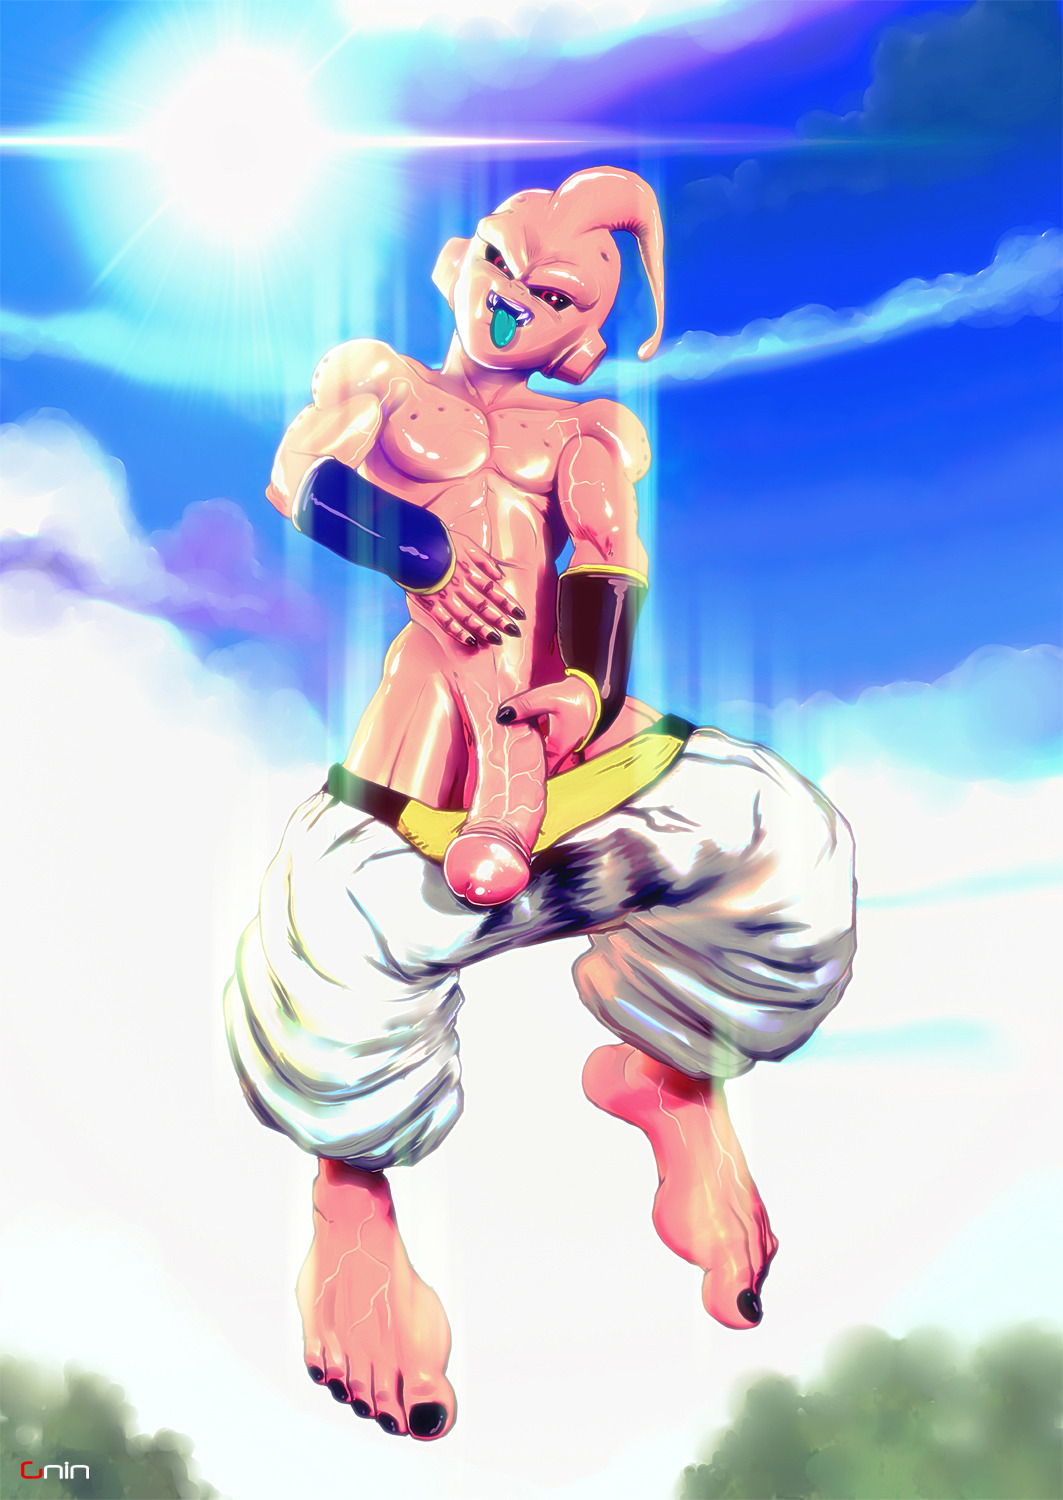 Yo!Always wanted to paint Kid Buu in this pose! Happened! Wahoo! So yeah, here’s a little quickie for you guys.Cya soon!XOXO Gnin